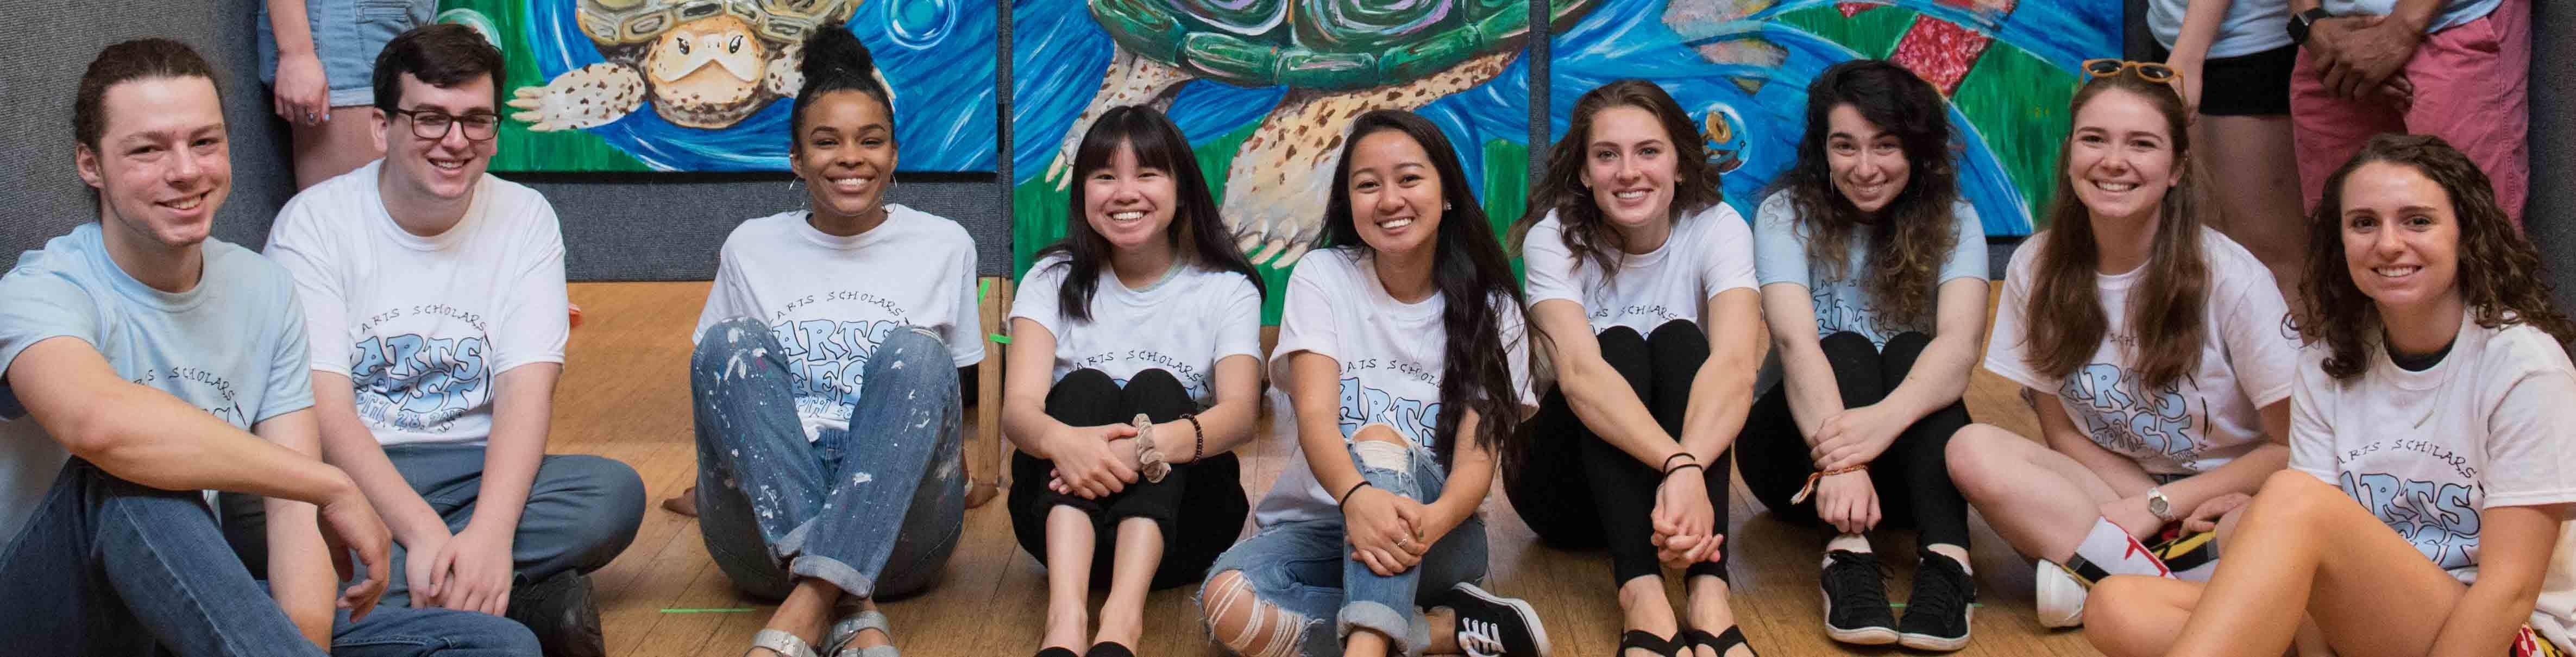 Arts students pose in front of a mural